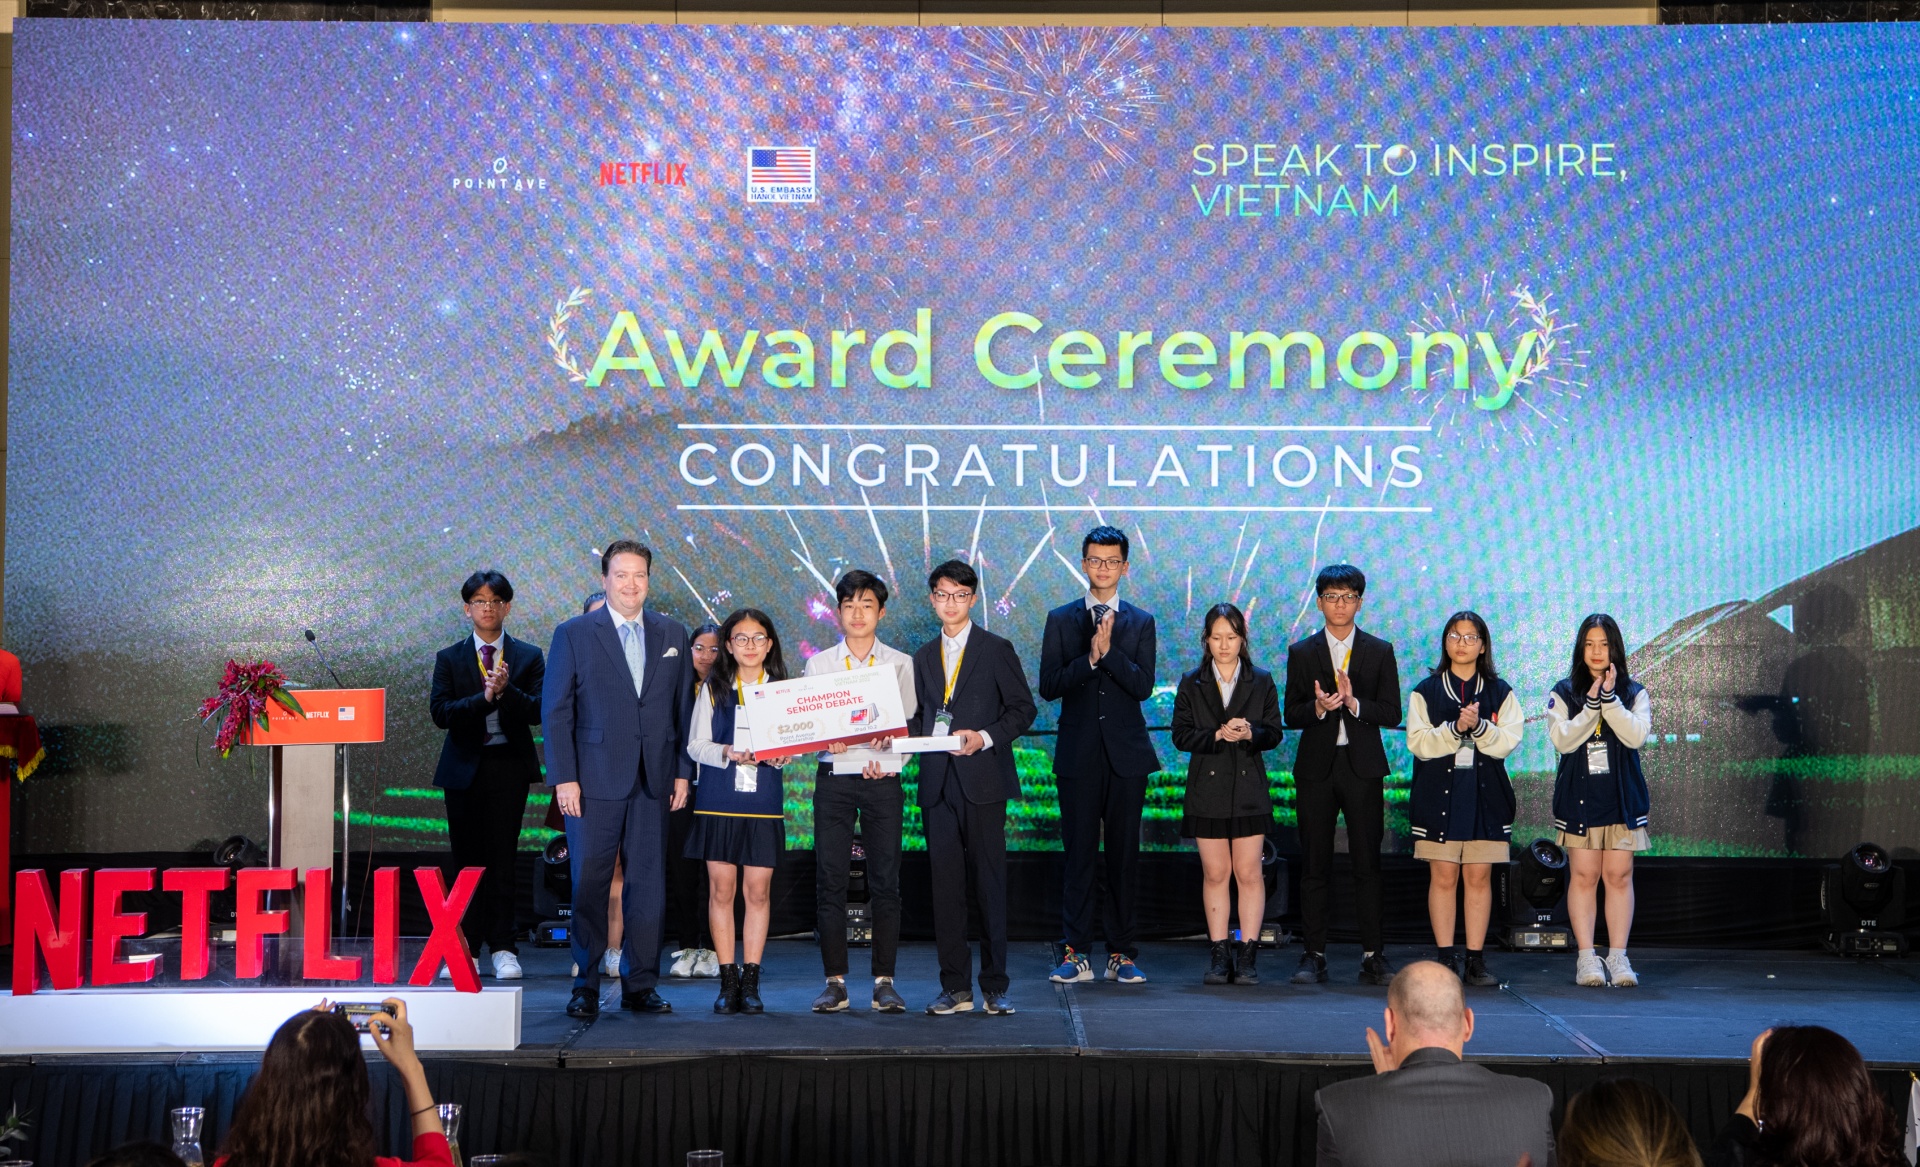 Debate tournament on sustainability empowers Vietnamese youth